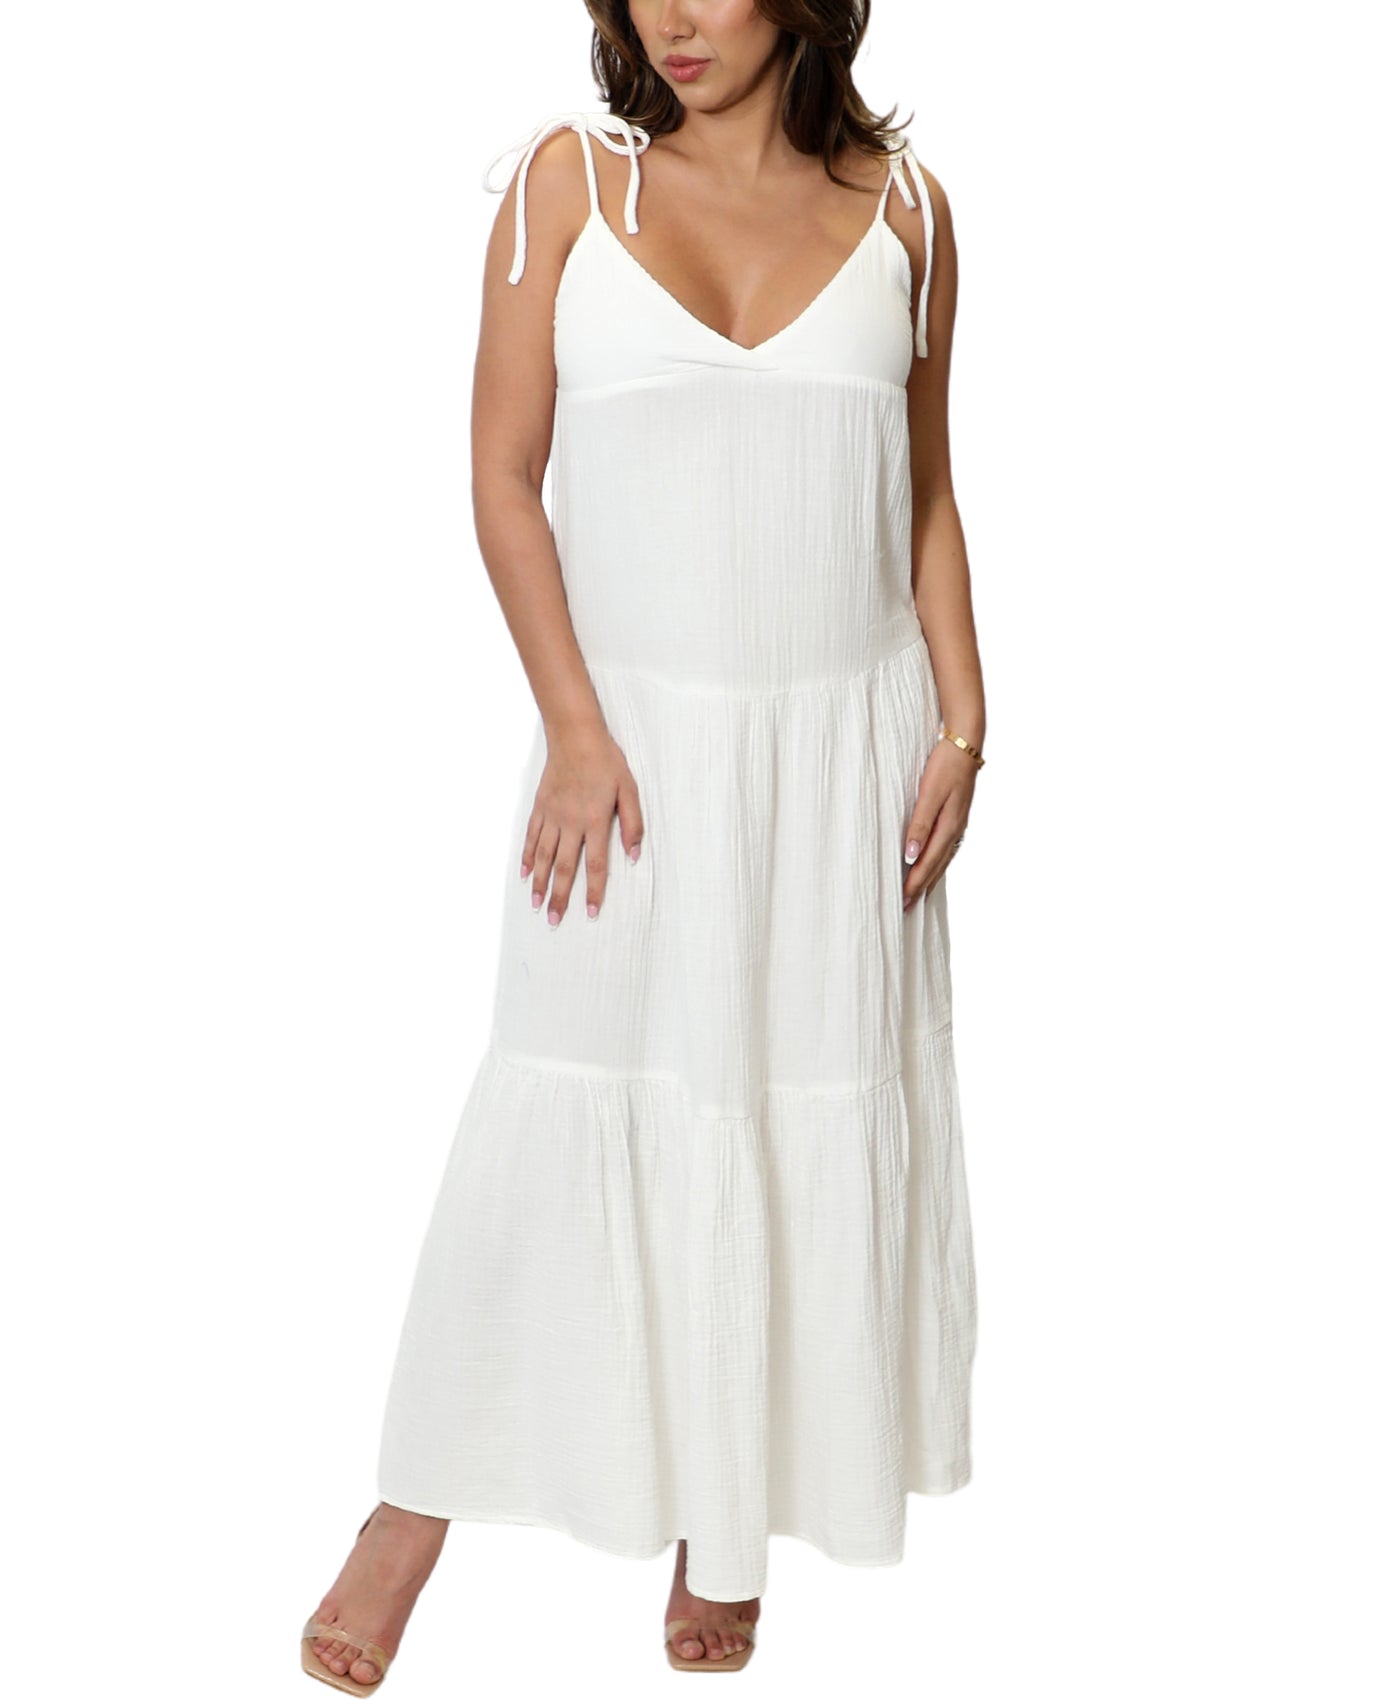 Tiered Maxi Dress Swim Cover-Up image 1